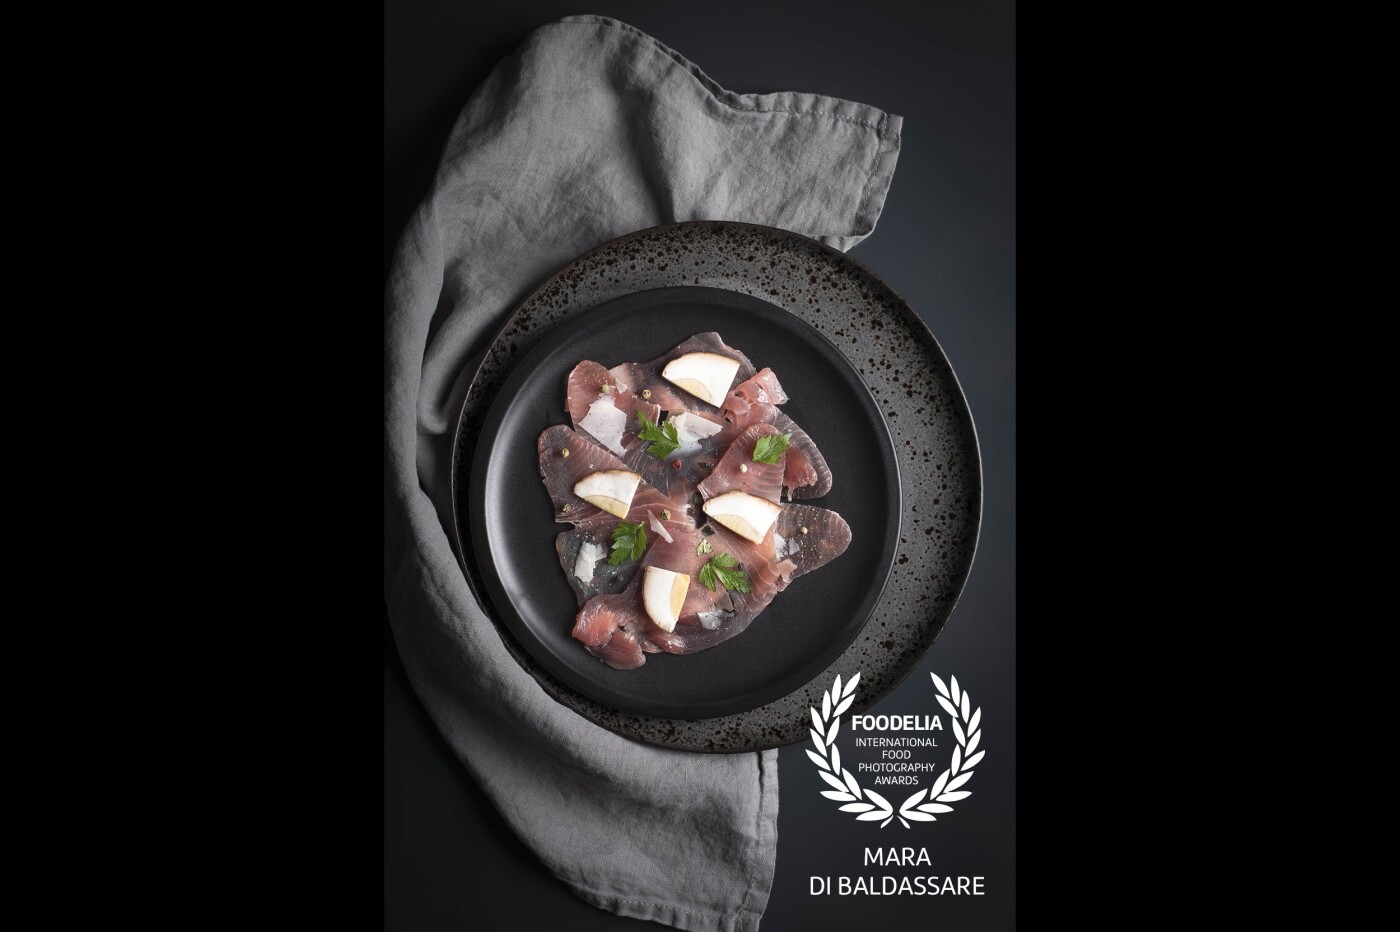 Capturing the flavour of the sea and mountains with this dish of tuna carpaccio and slices of porcini mushrooms.<br />
